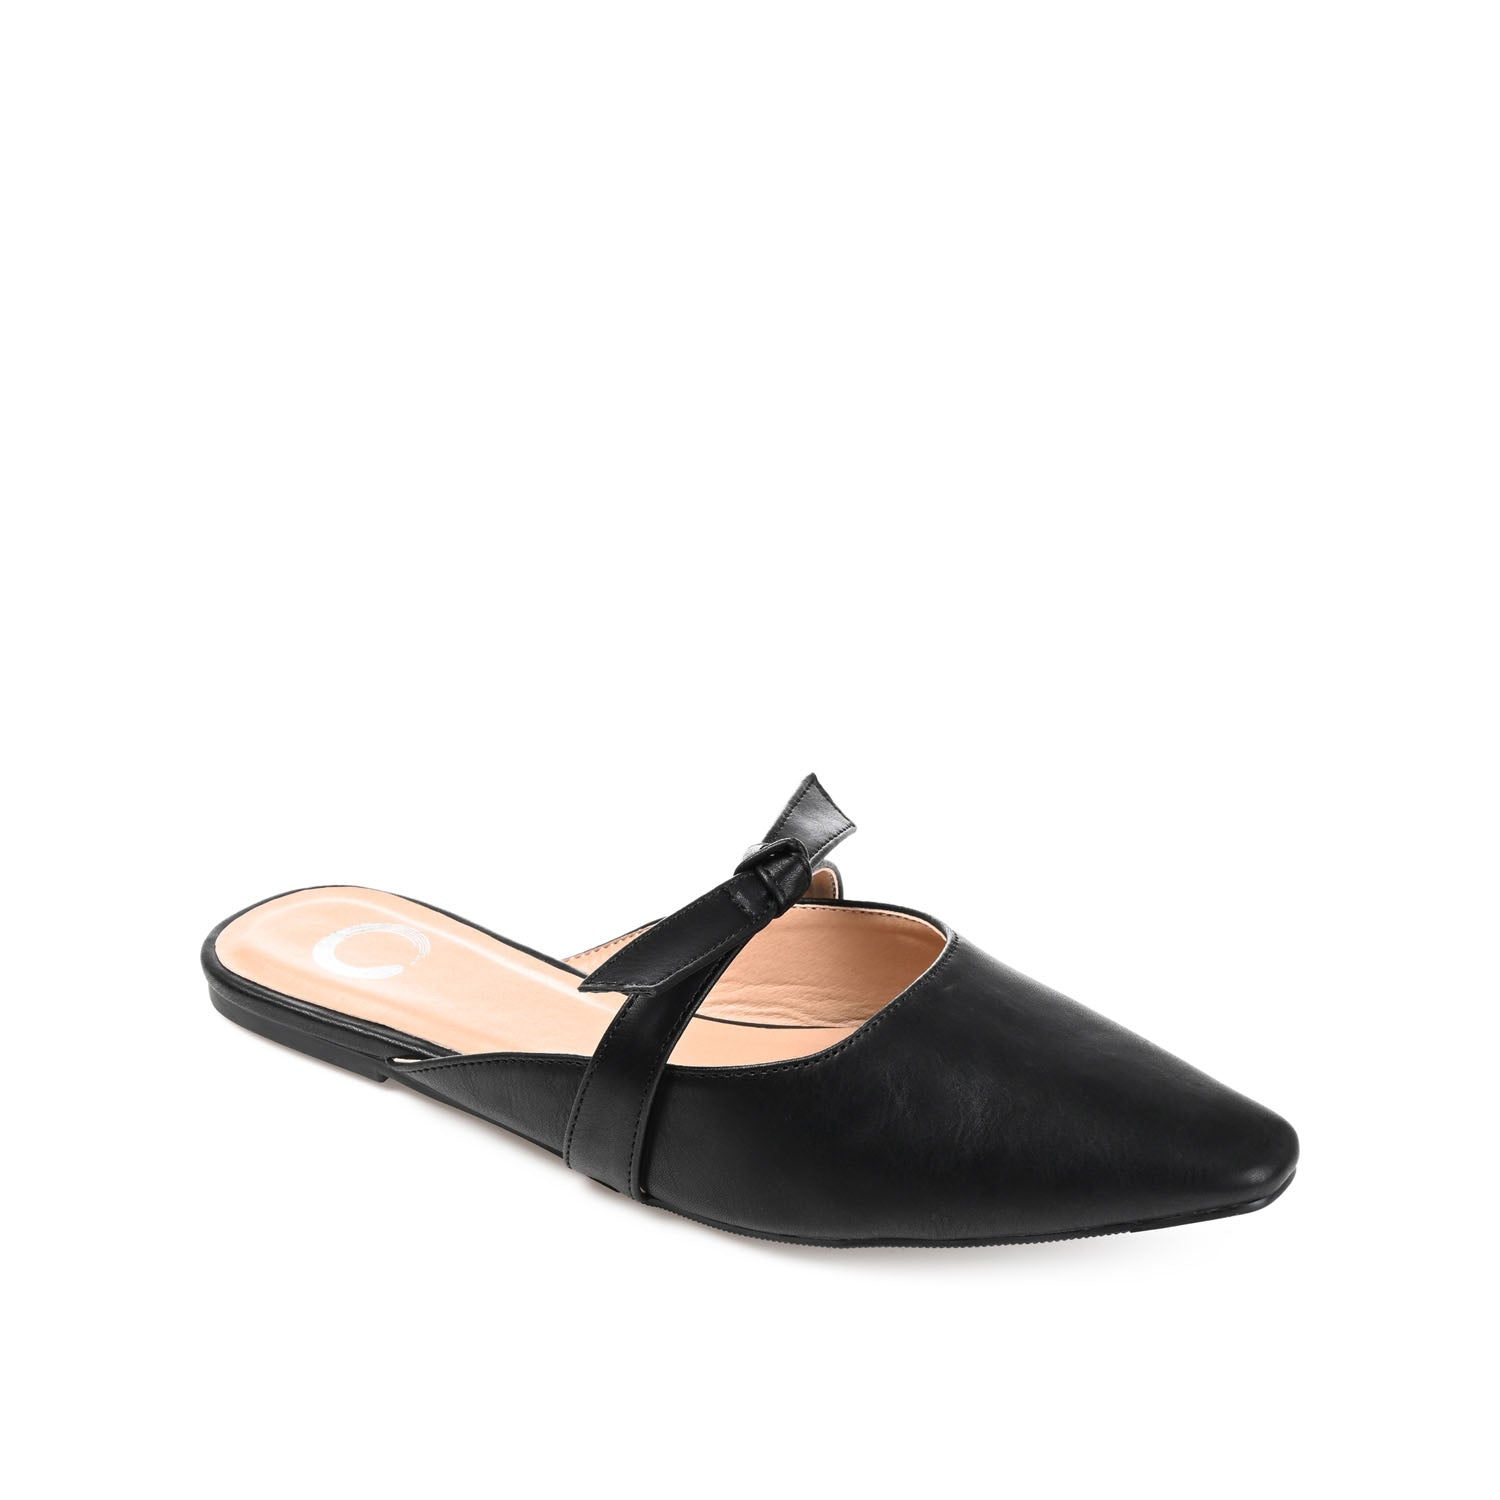 MISSIE MULED FLATS IN FAUX LEATHER